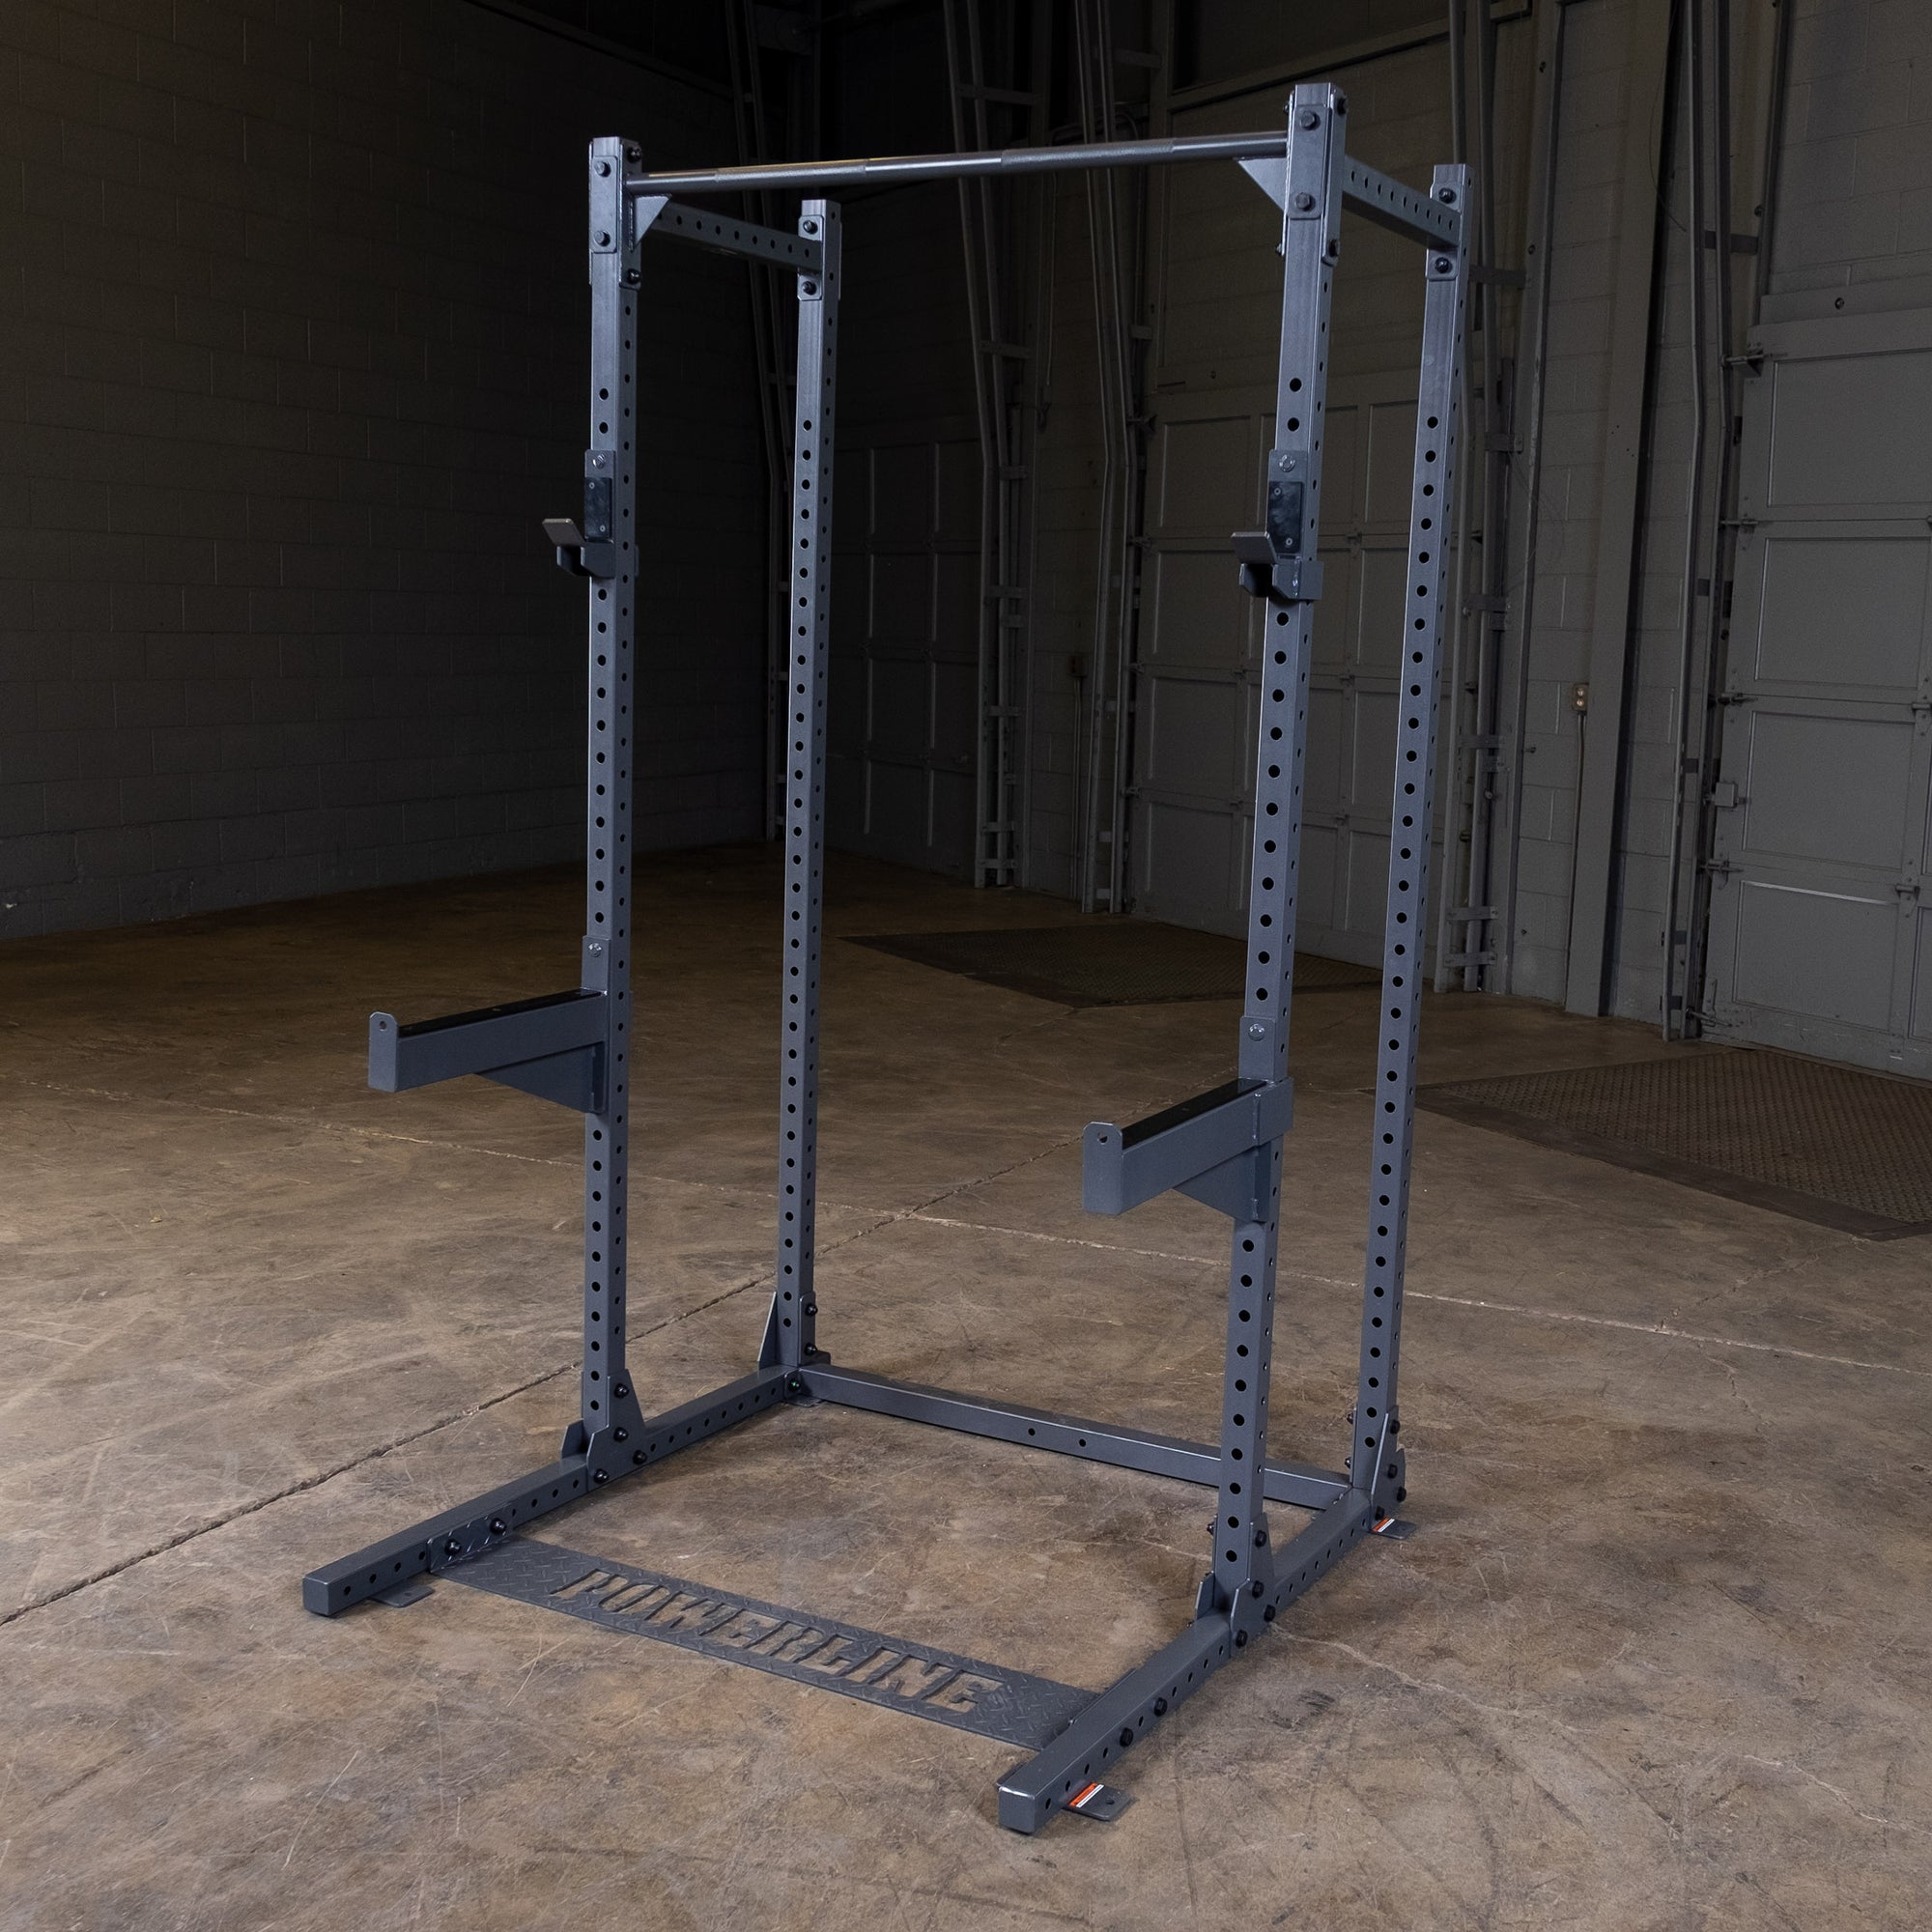 Extension for PPR500 Powerline Half Rack (Extension Only, Rack Not Included)